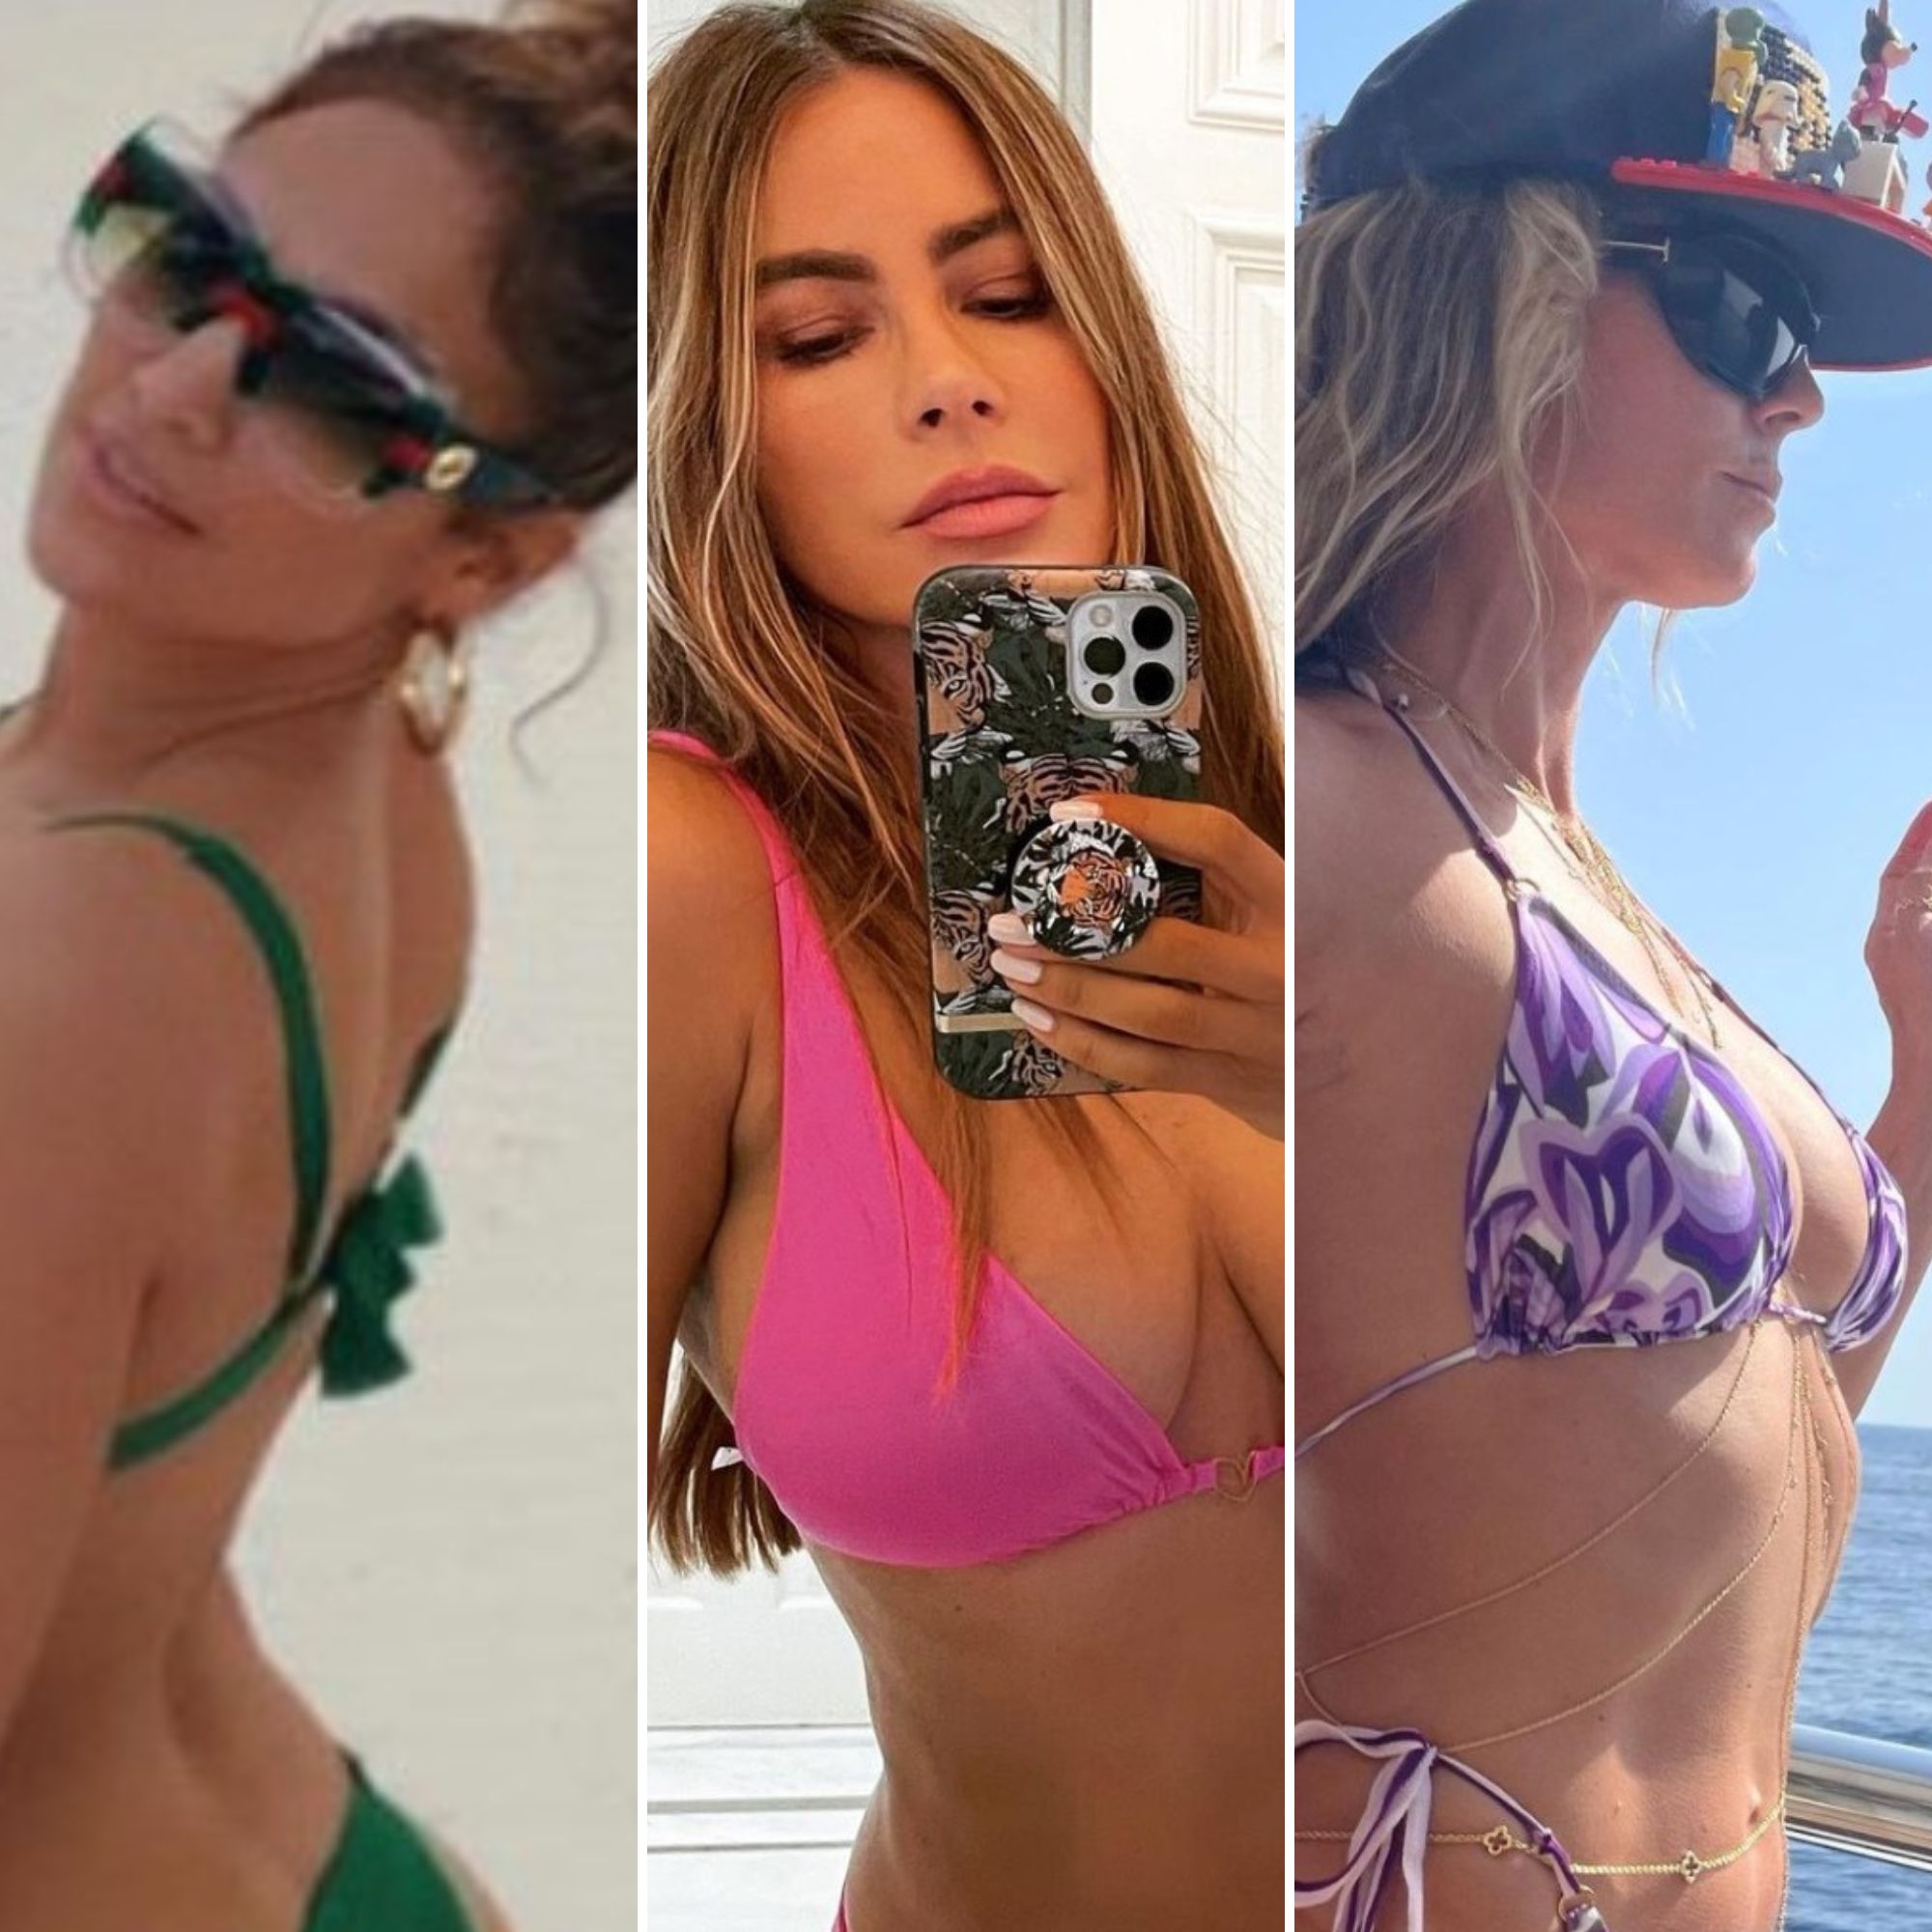 Beach Girls Topless Pageant - Celebrity Bikini Pictures: A-Listers Over 40 Who Look Amazing!